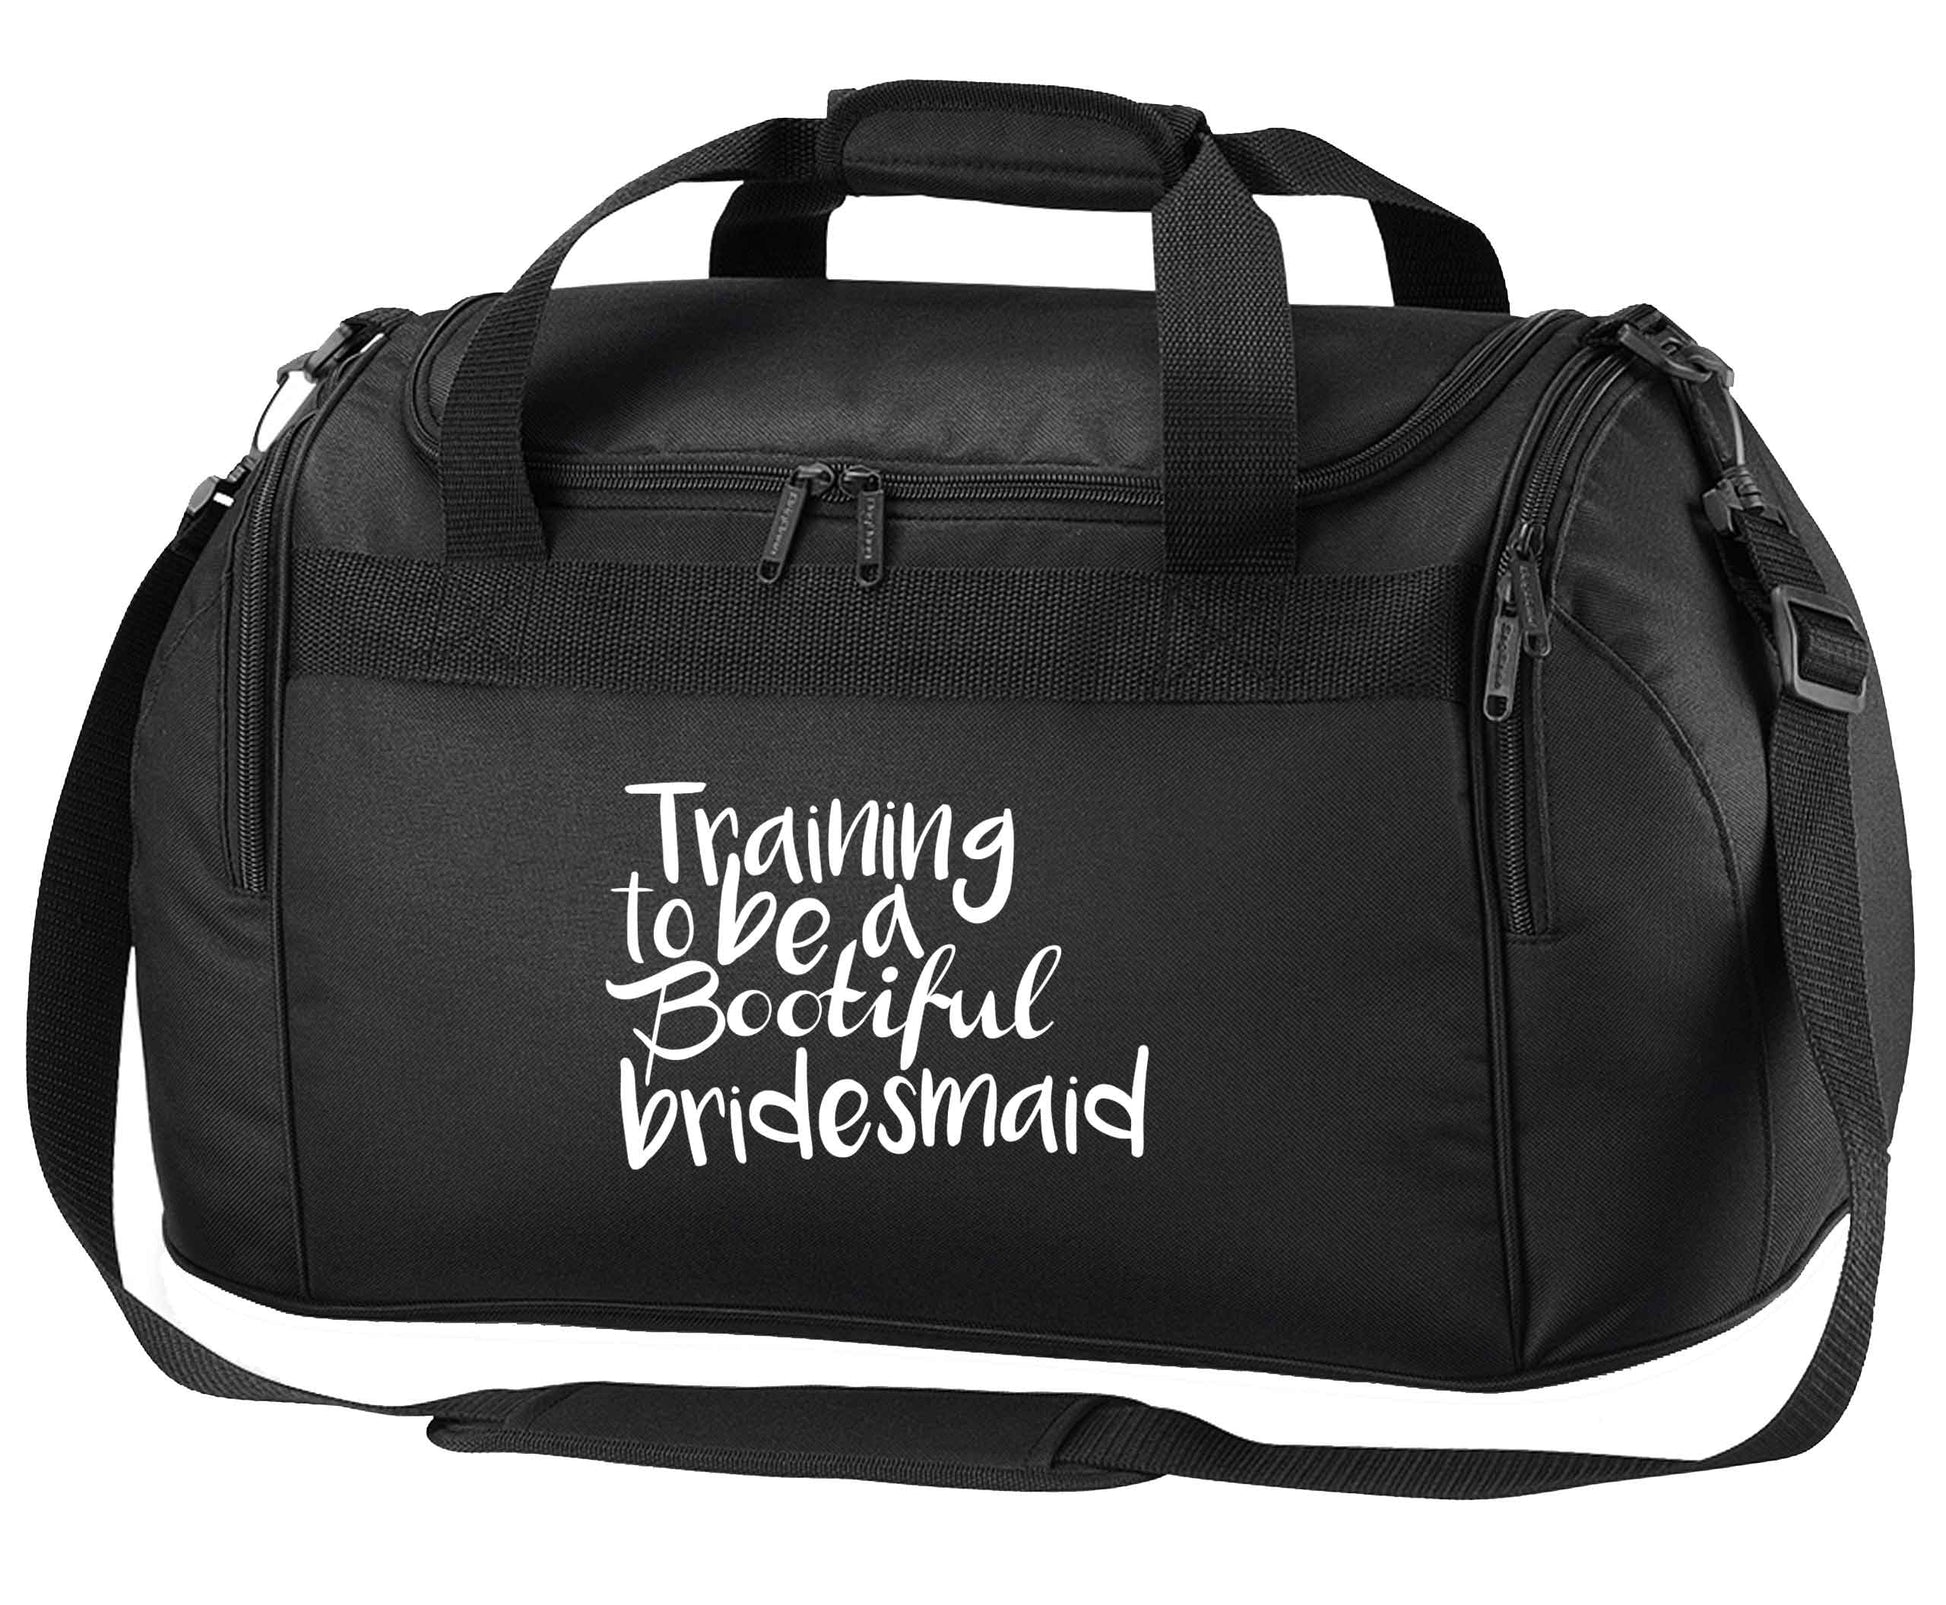 Get motivated and get fit for your big day! Our workout quotes and designs will get you ready to sweat! Perfect for any bride, groom or bridesmaid to be!  black holdall / duffel bag